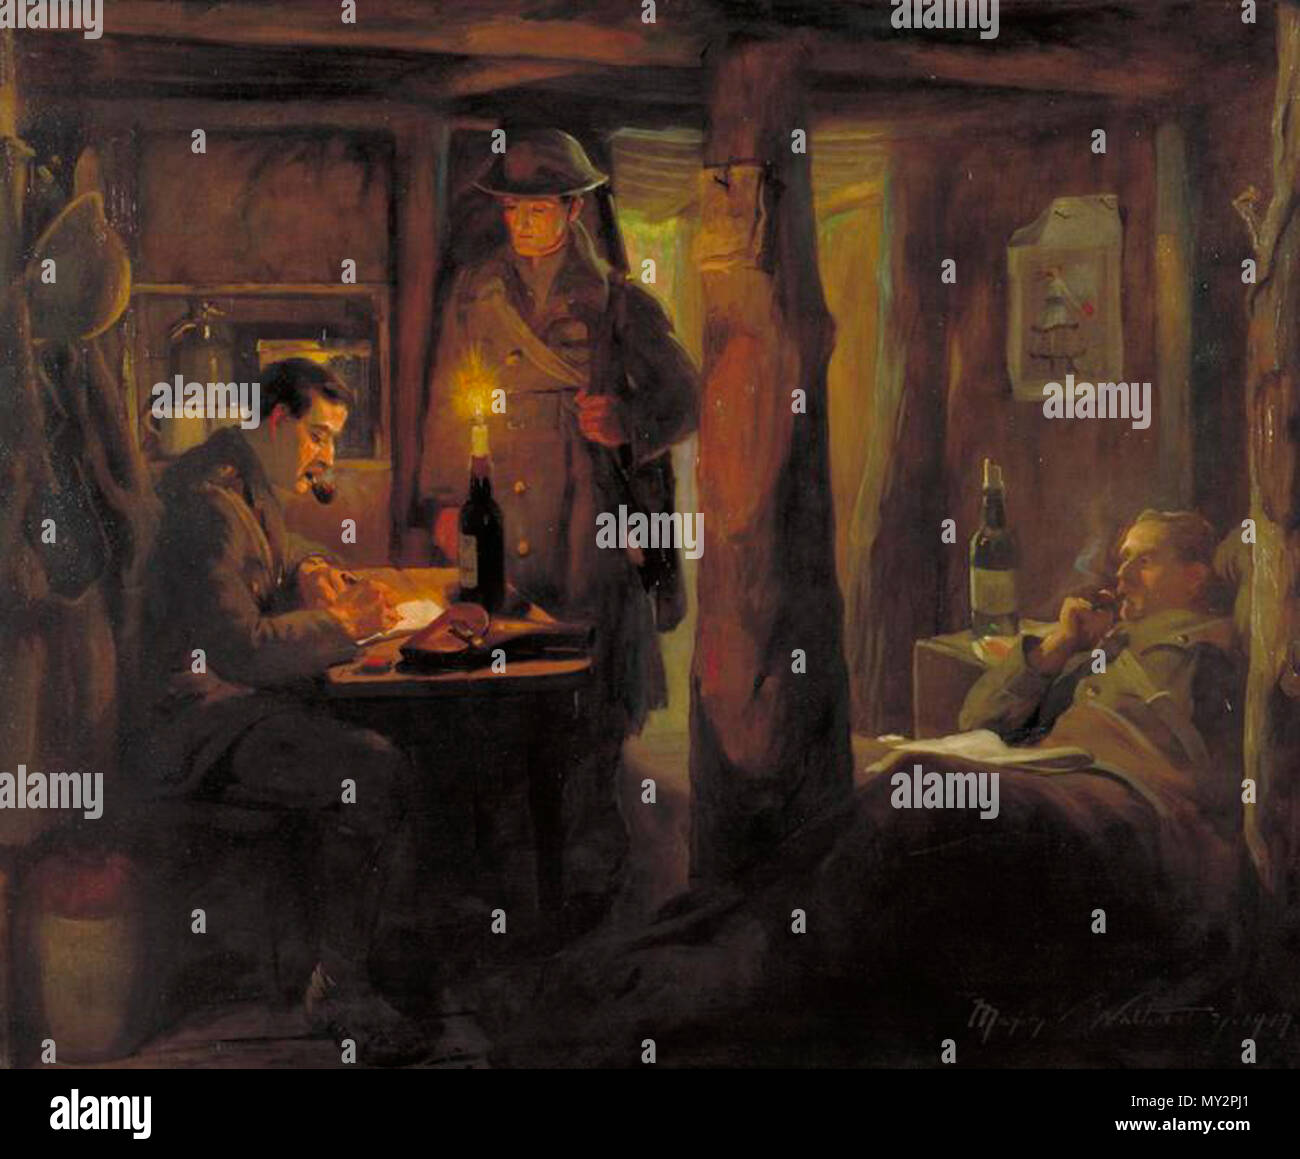 . English: The Dispatch (the Captain's Dugout) image: A dark, candle lit interior of a dug-out. On the left there is an officer smoking a pipe while sitting at a makeshift desk signing a paper. A messenger stands by in helmet and overcoat, waiting for the reply. There is another officer to the right who sits back in a low chair, a newspaper draped over his knees, also smoking a pipe. 1917 (First World War). Creator:Marjorie Violet Watherston 519 The Dispatch (the Captain's Dugout) Art.IWMART5199 Stock Photo